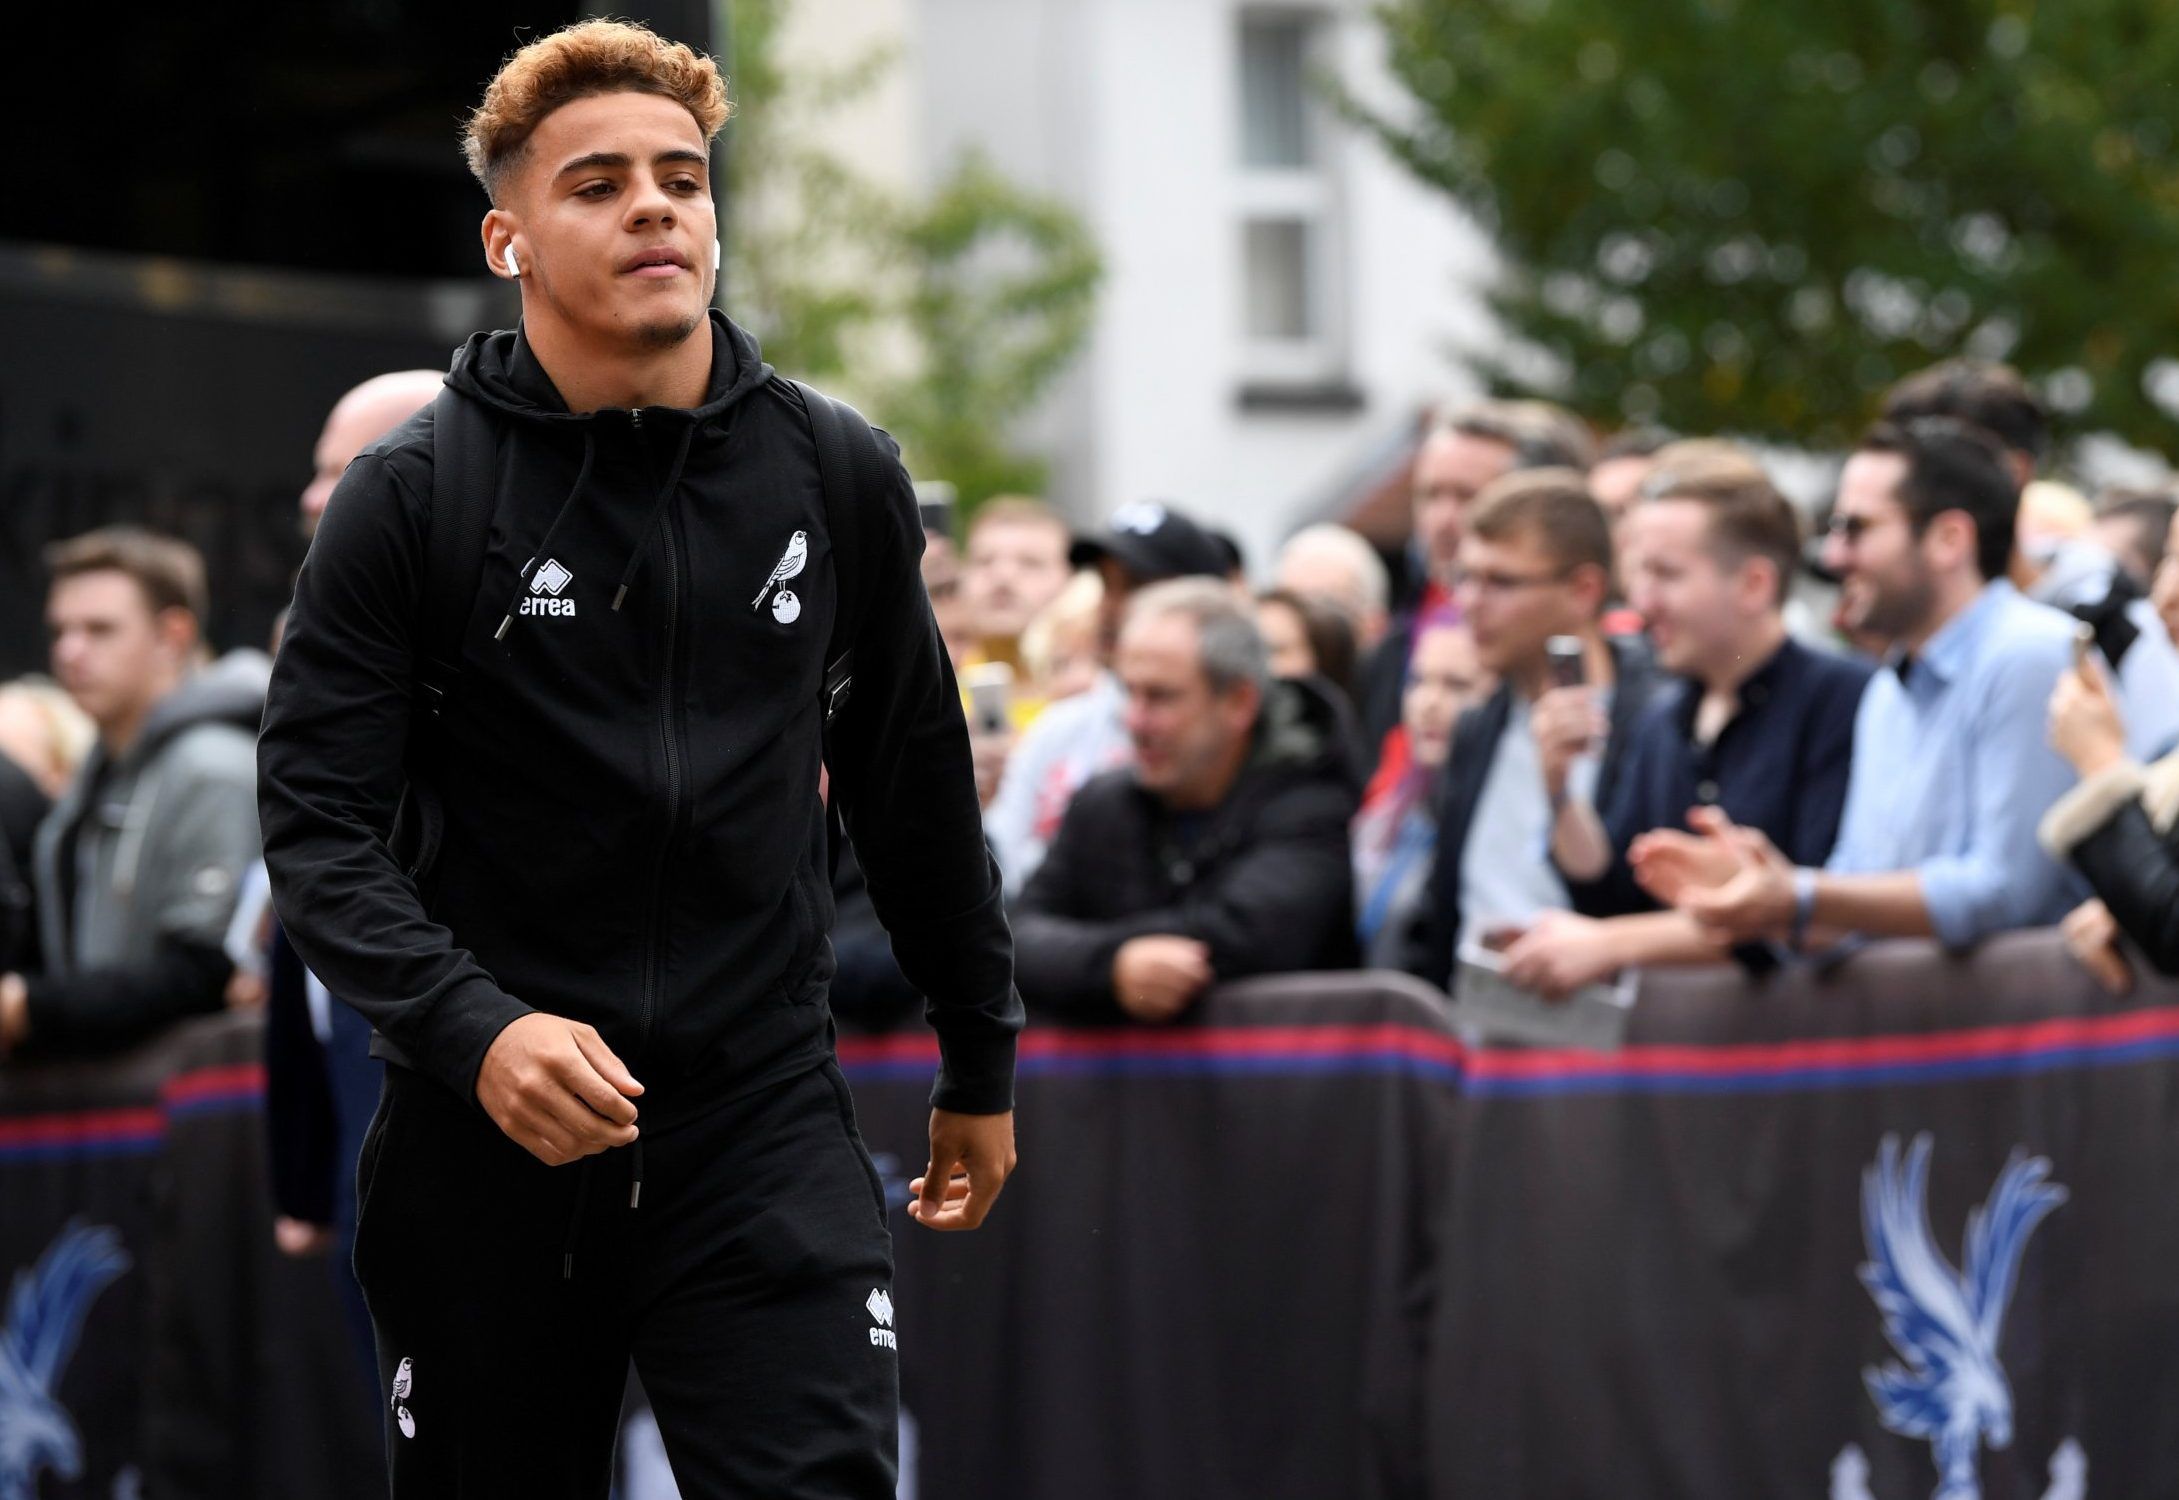 norwich city defender and spurs transfer target max aarons arrives pre-game premier league